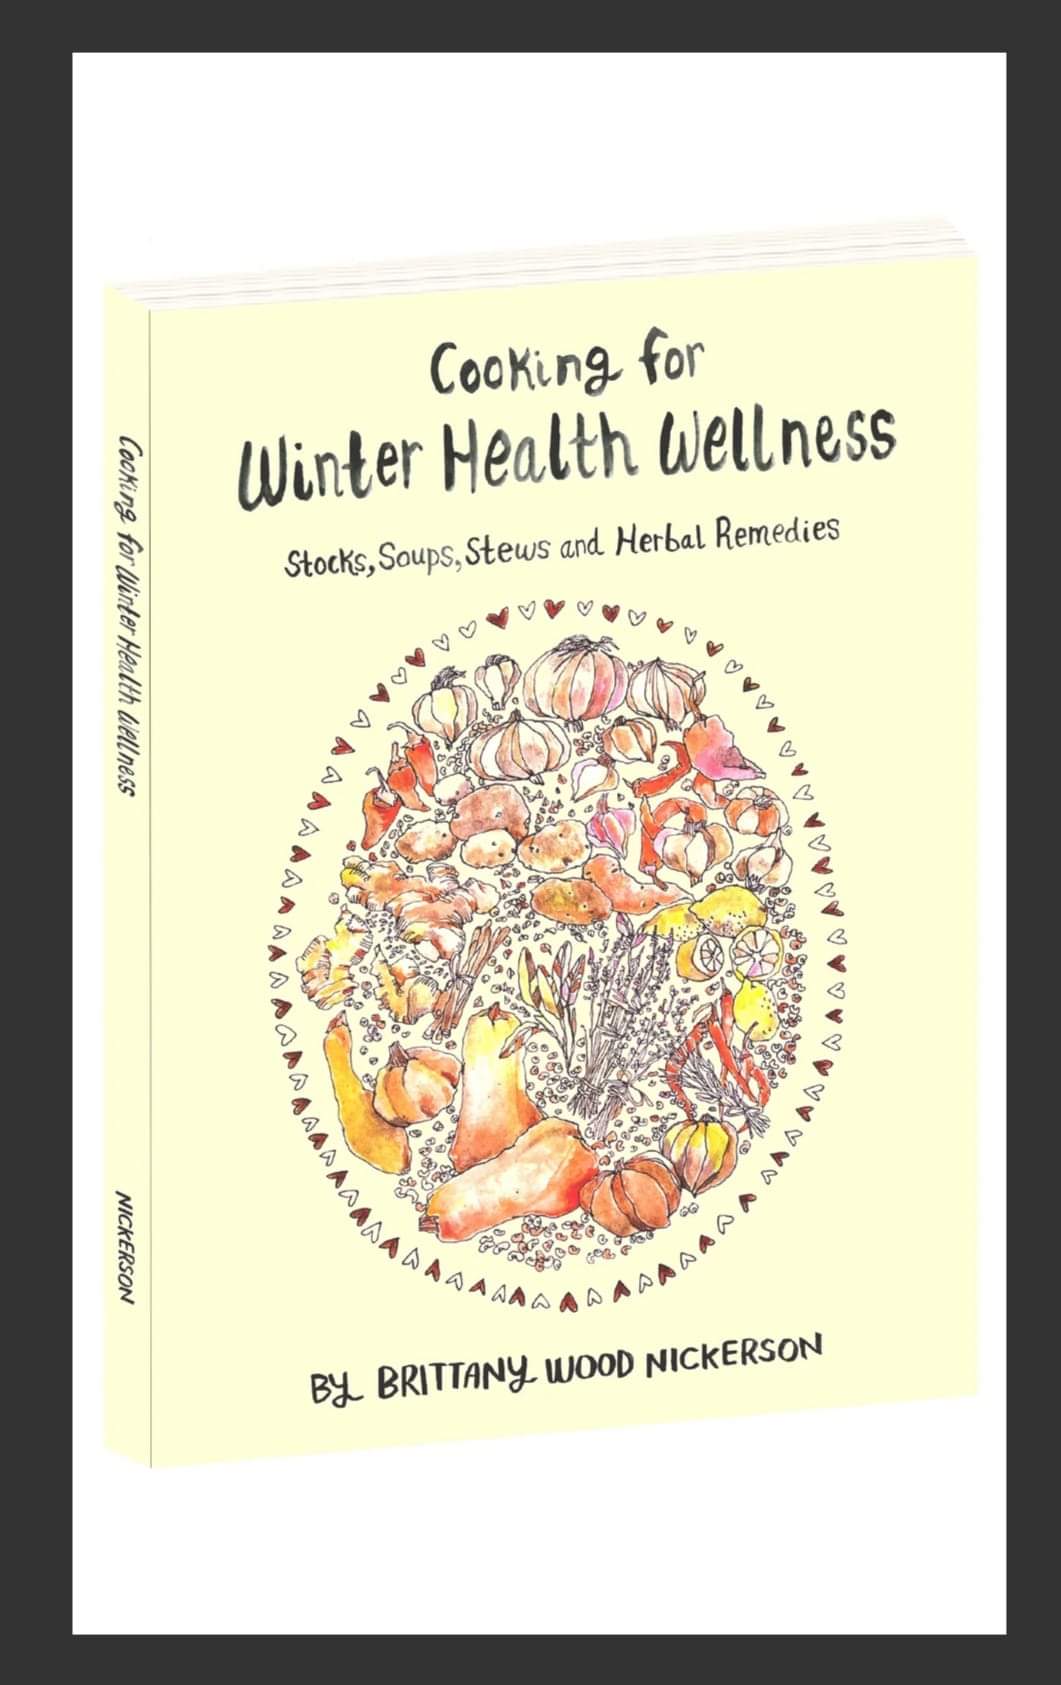 Cooking for Winter Health & Wellness